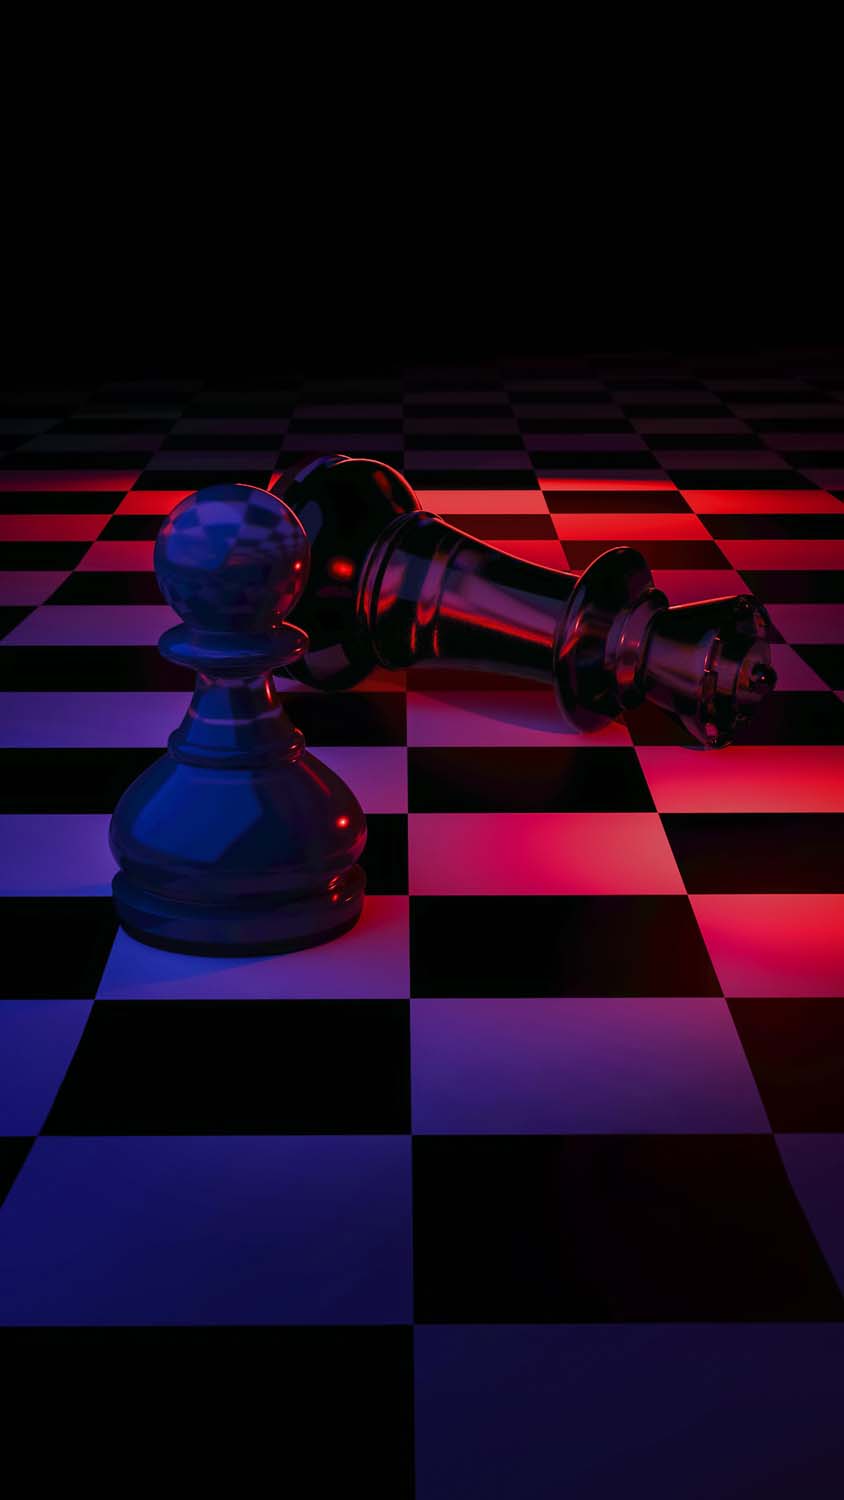 Download Chess King Wooden Pieces Wallpaper | Wallpapers.com